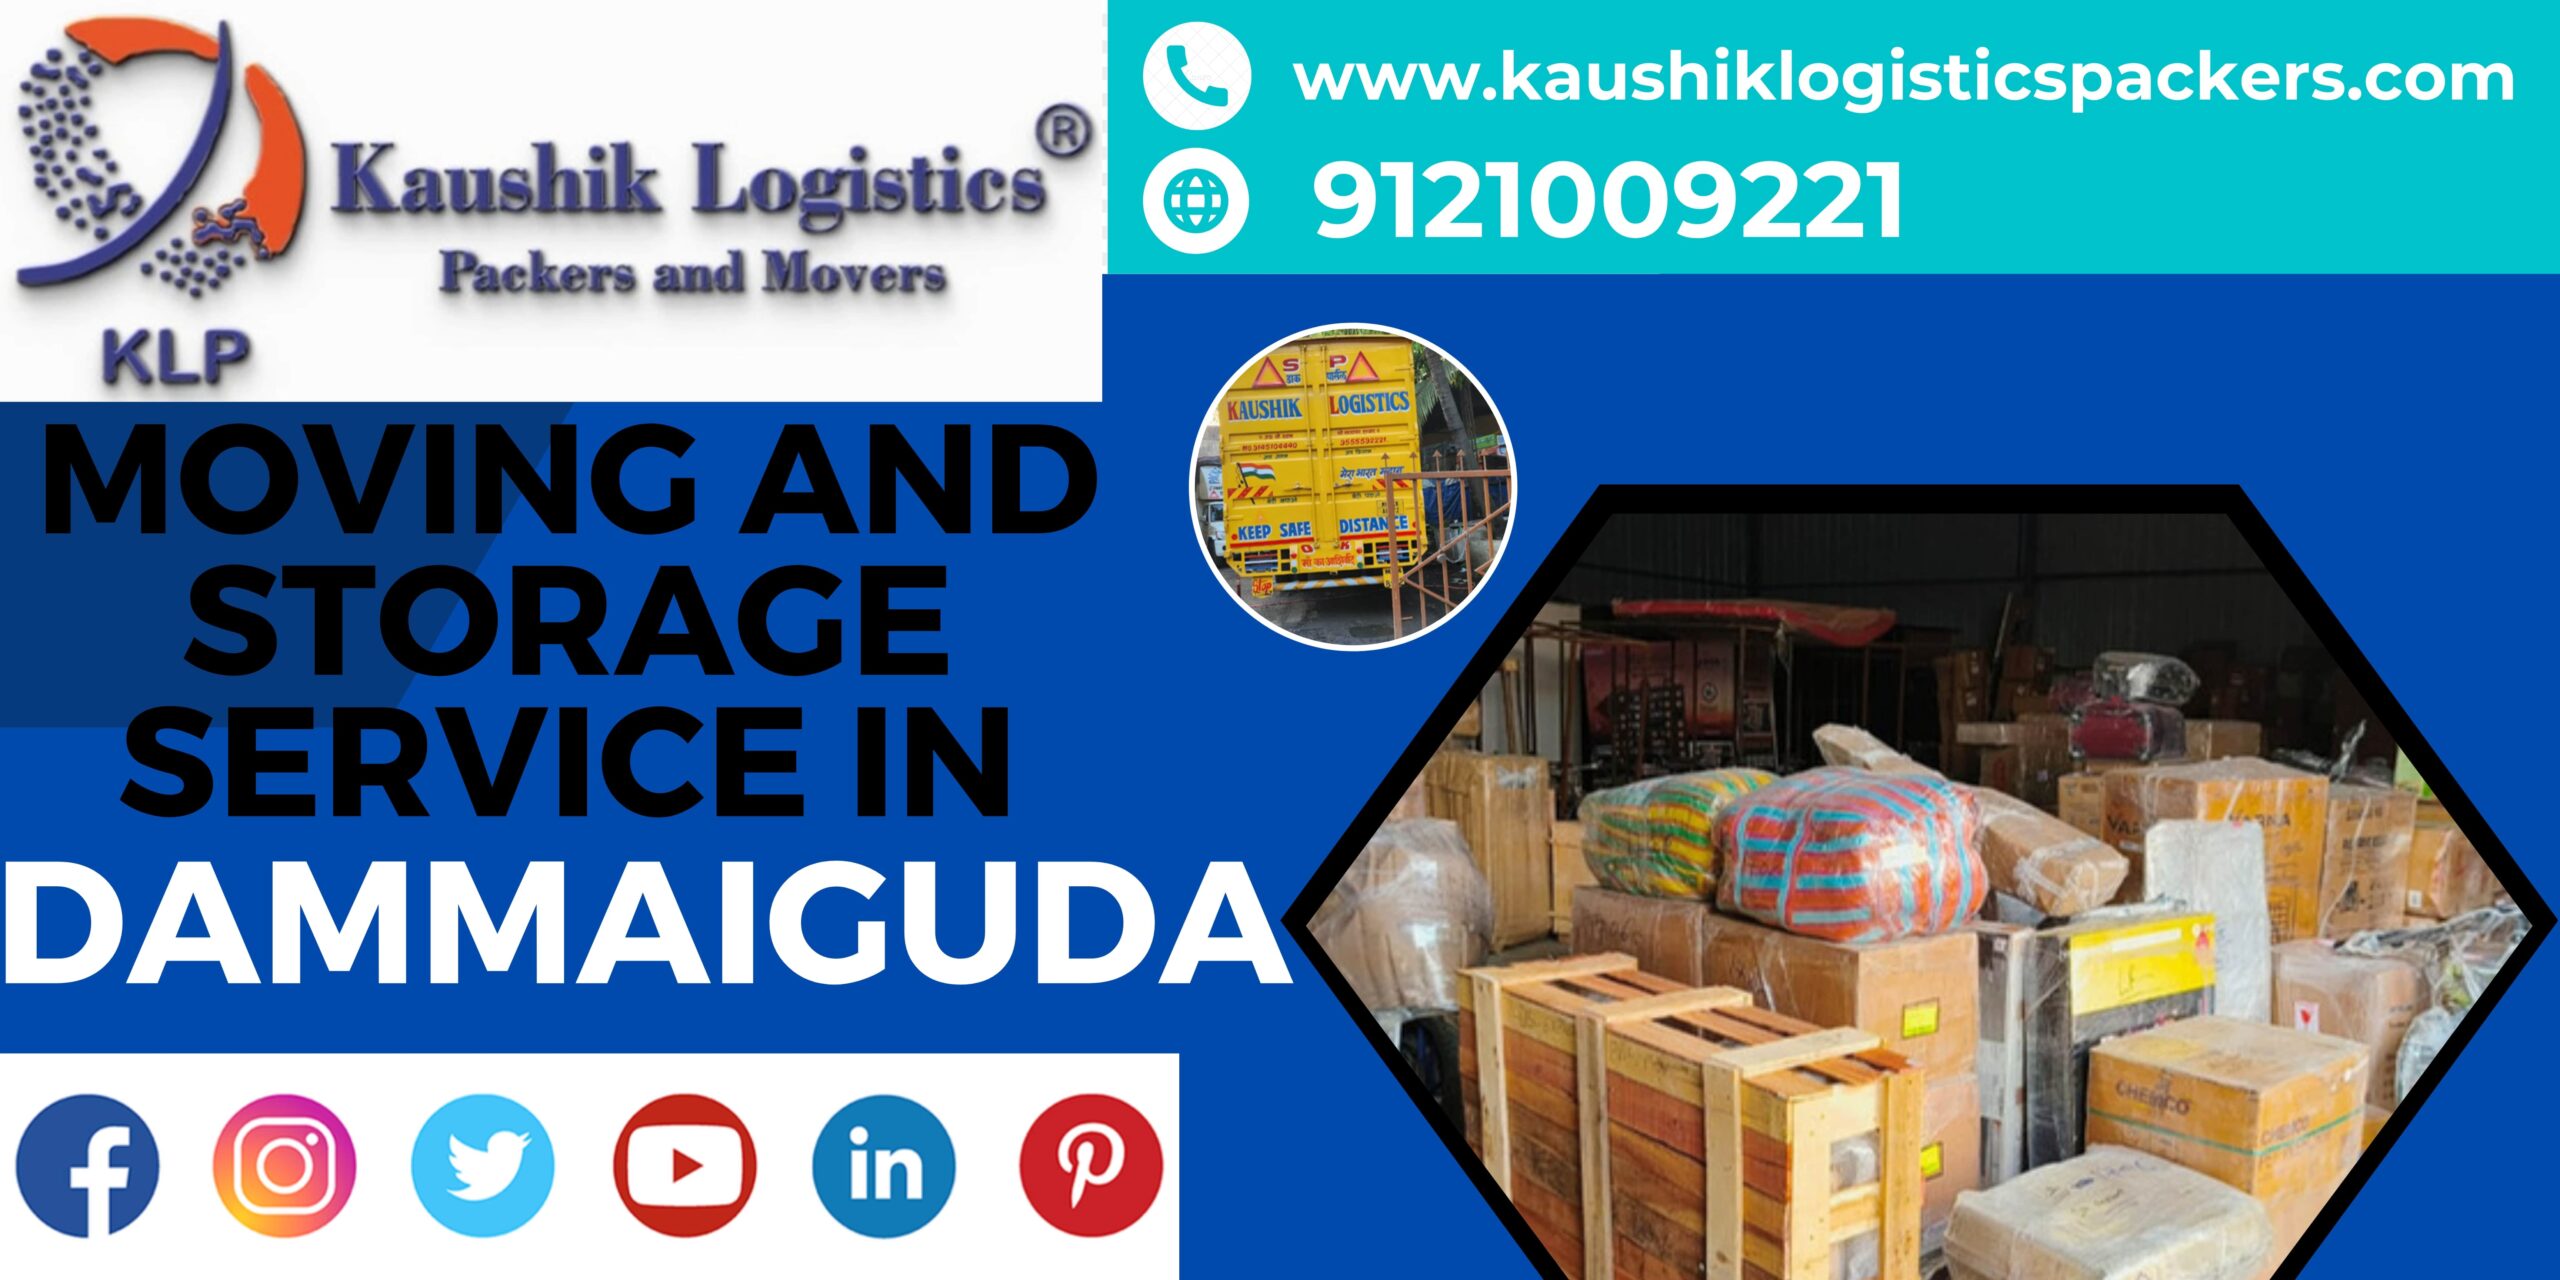 Packers and Movers In Dammaiguda